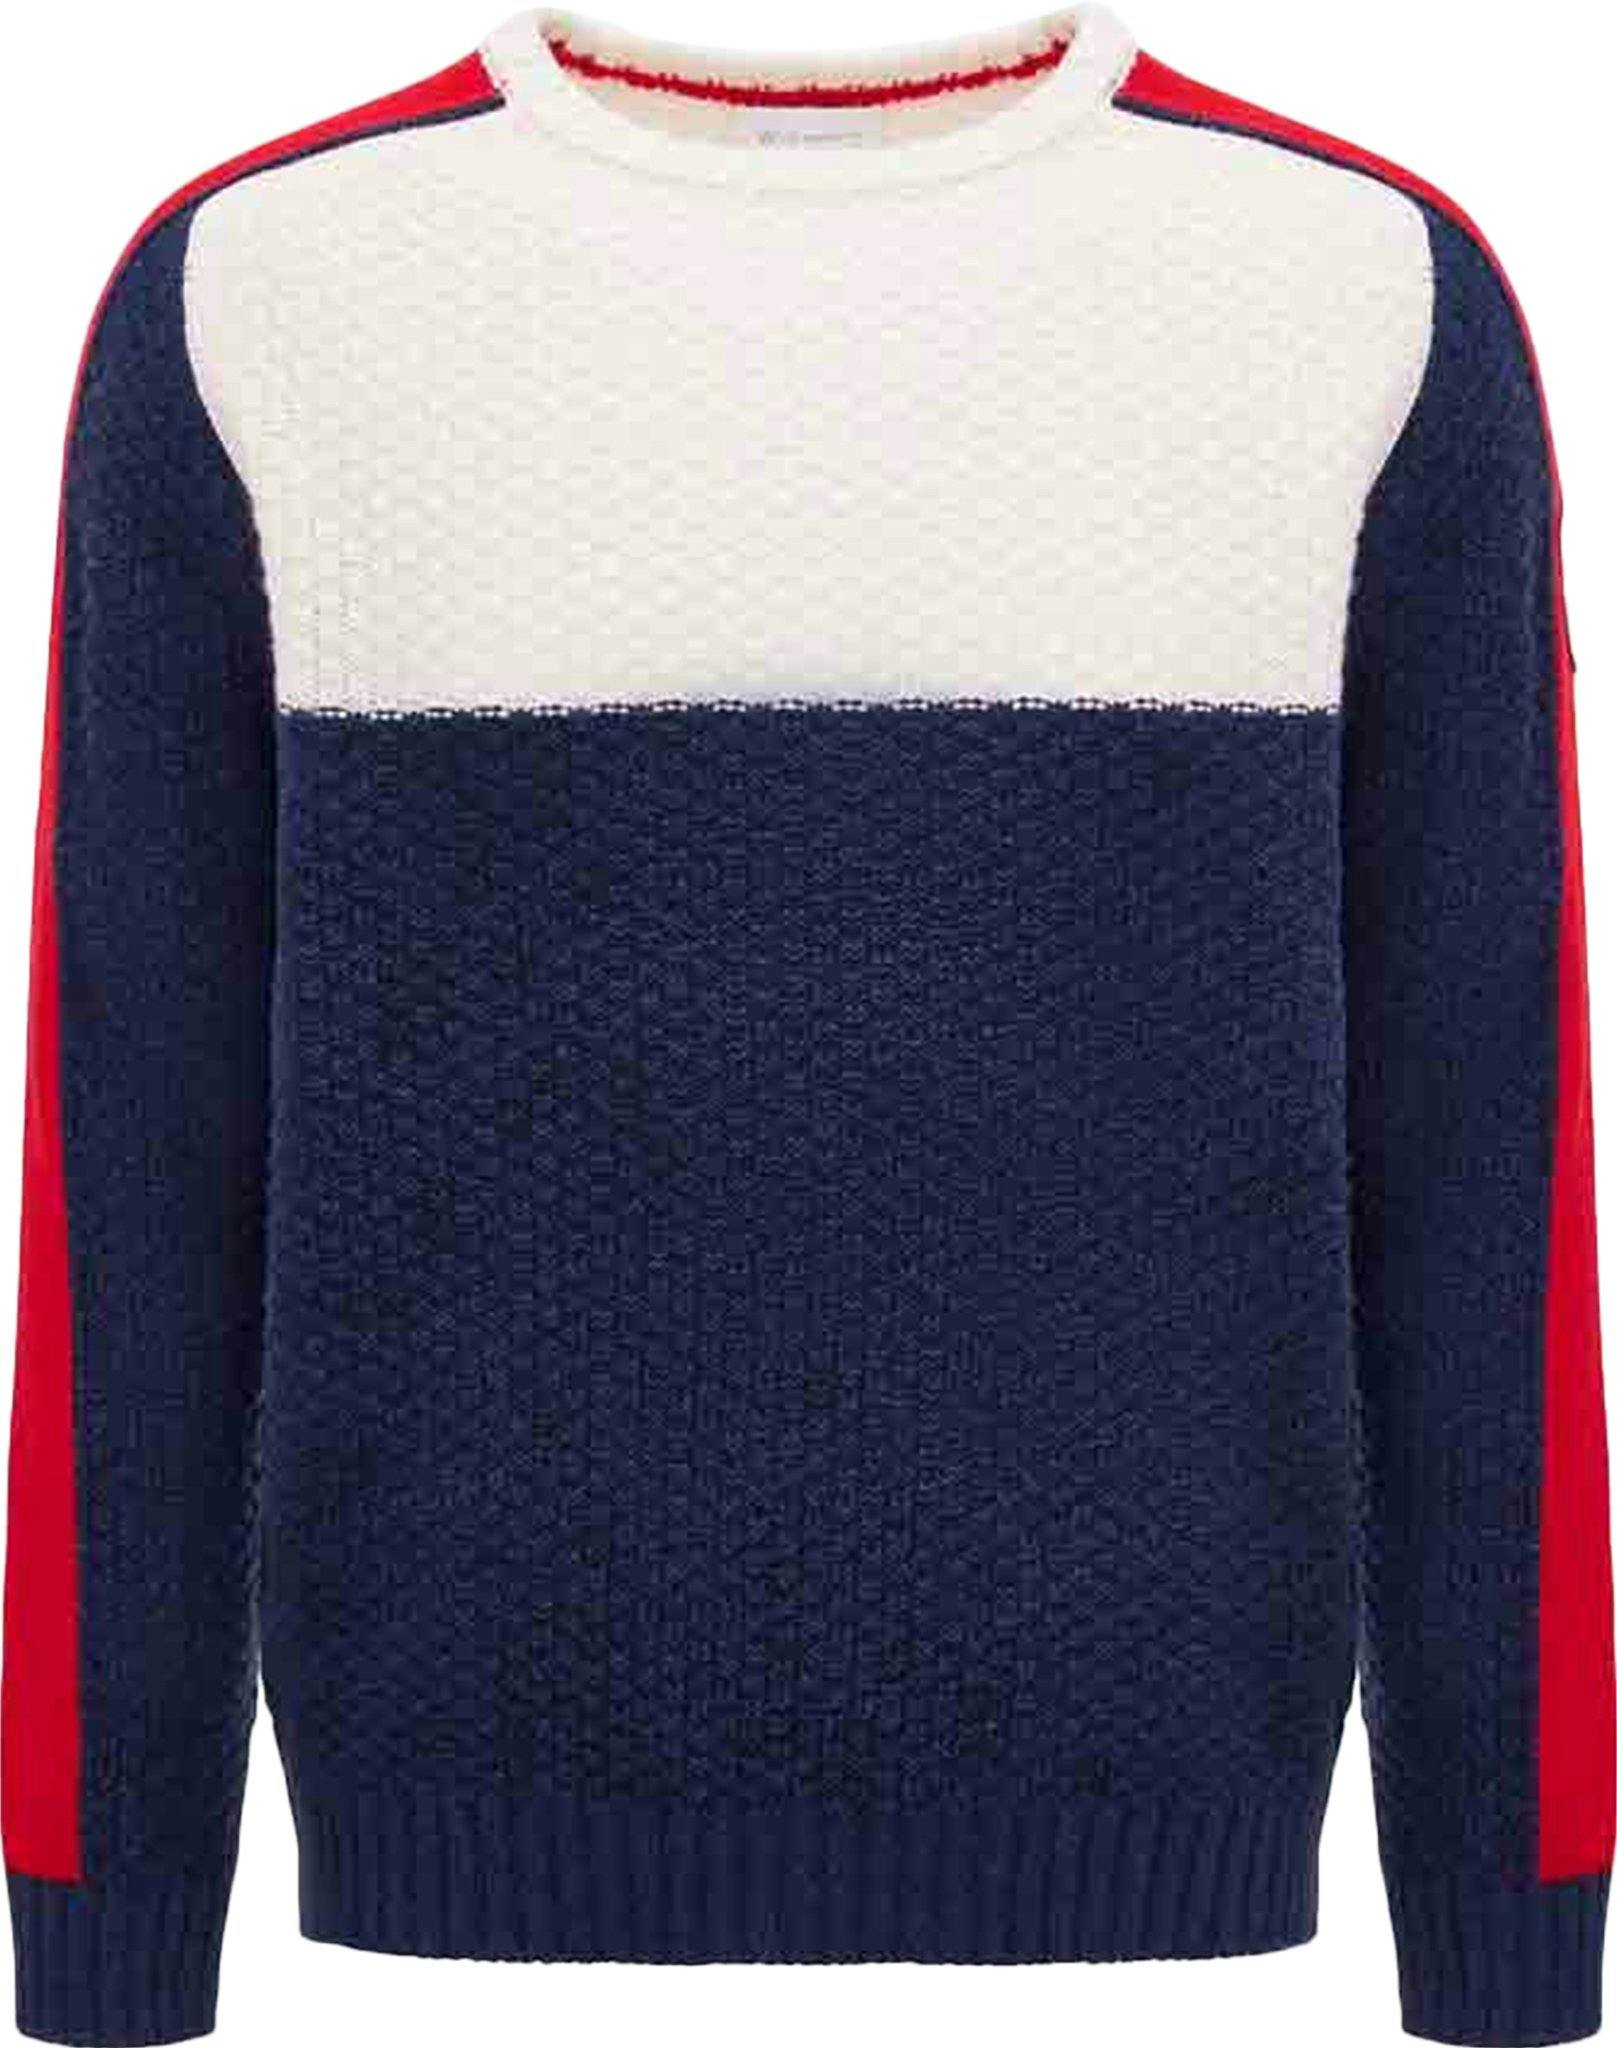 Product image for Trysil Sweater - Men's